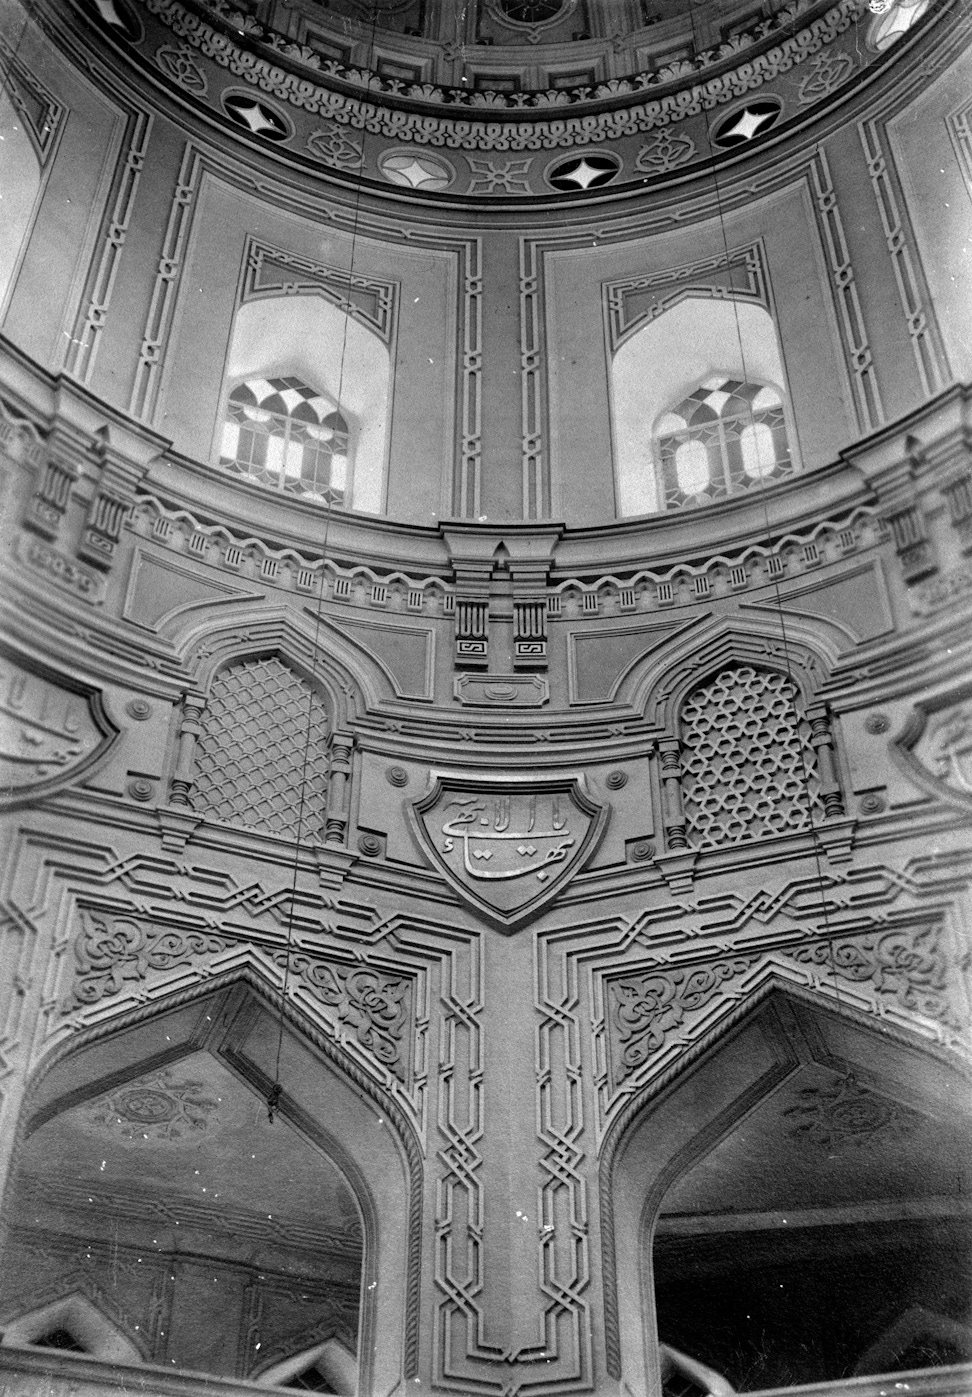 Interior of the Continental Bahá’í House of Worship of Central Asia (Ashkhabad, Turkmenistan), early 1900s